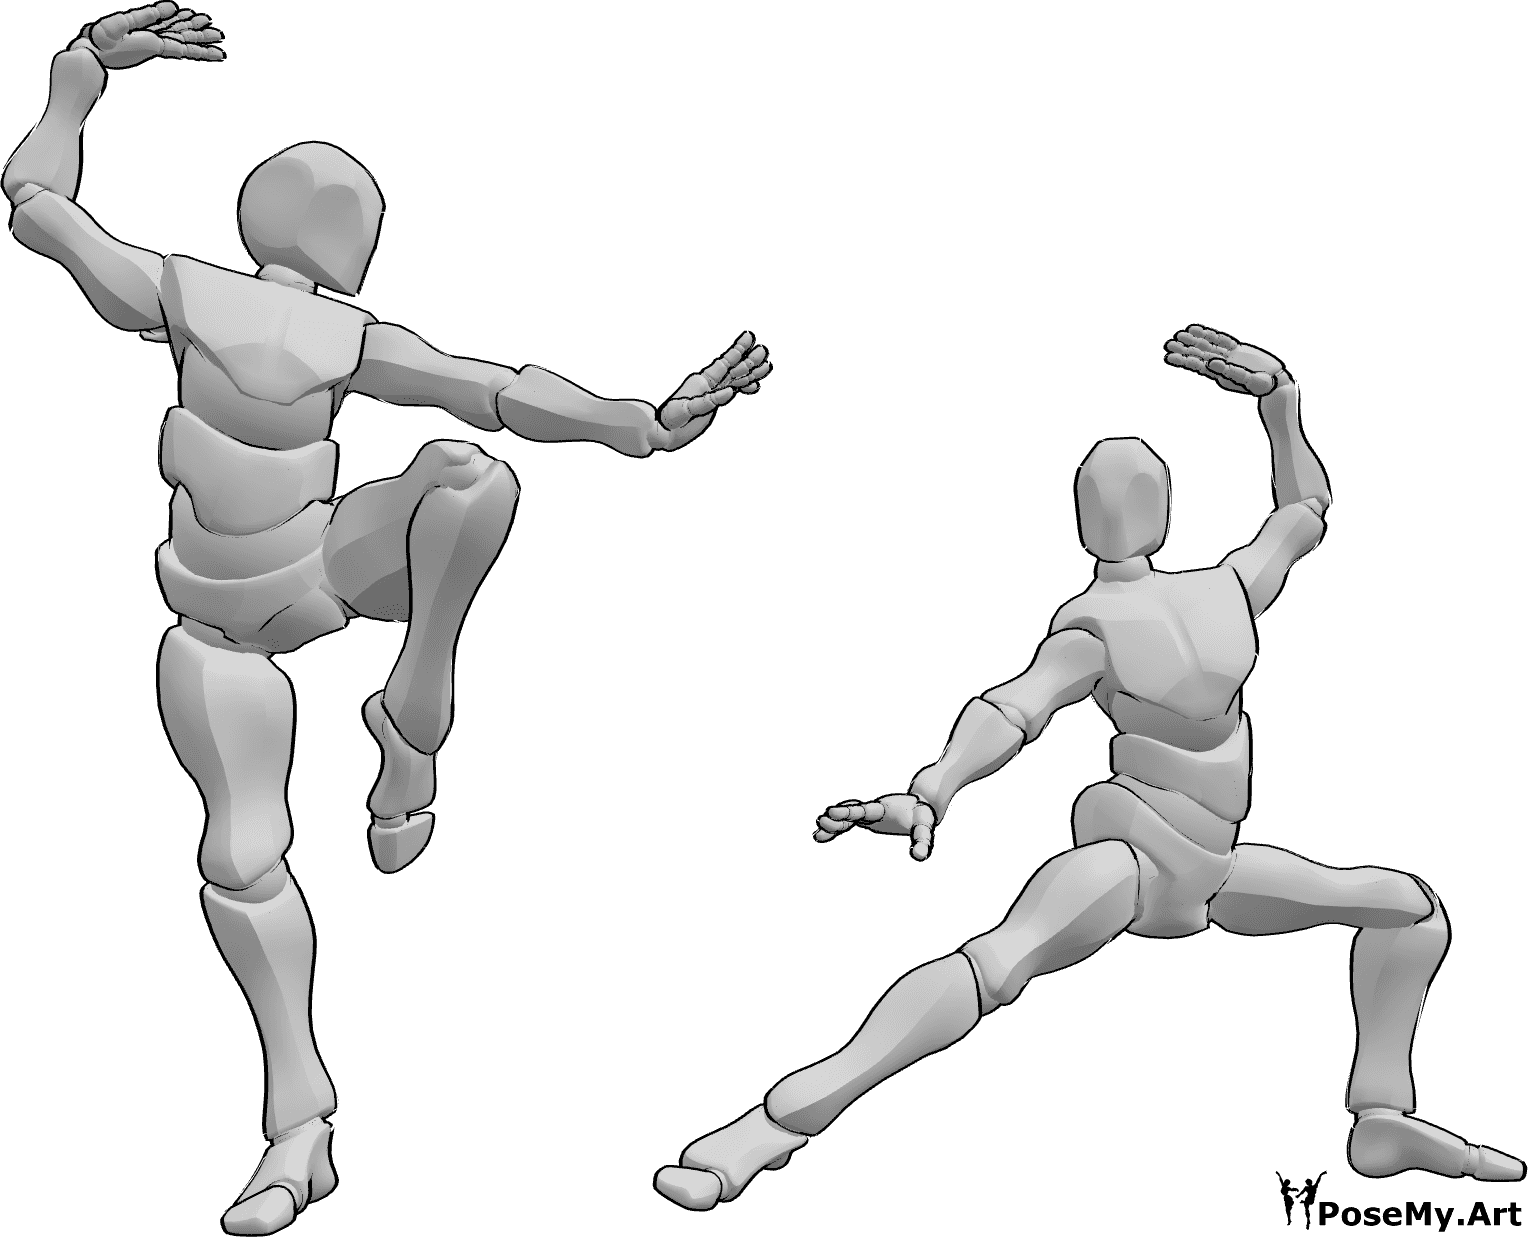 Pose Reference- Males tai chi pose - Two males are doing tai chi together, tai chi pose